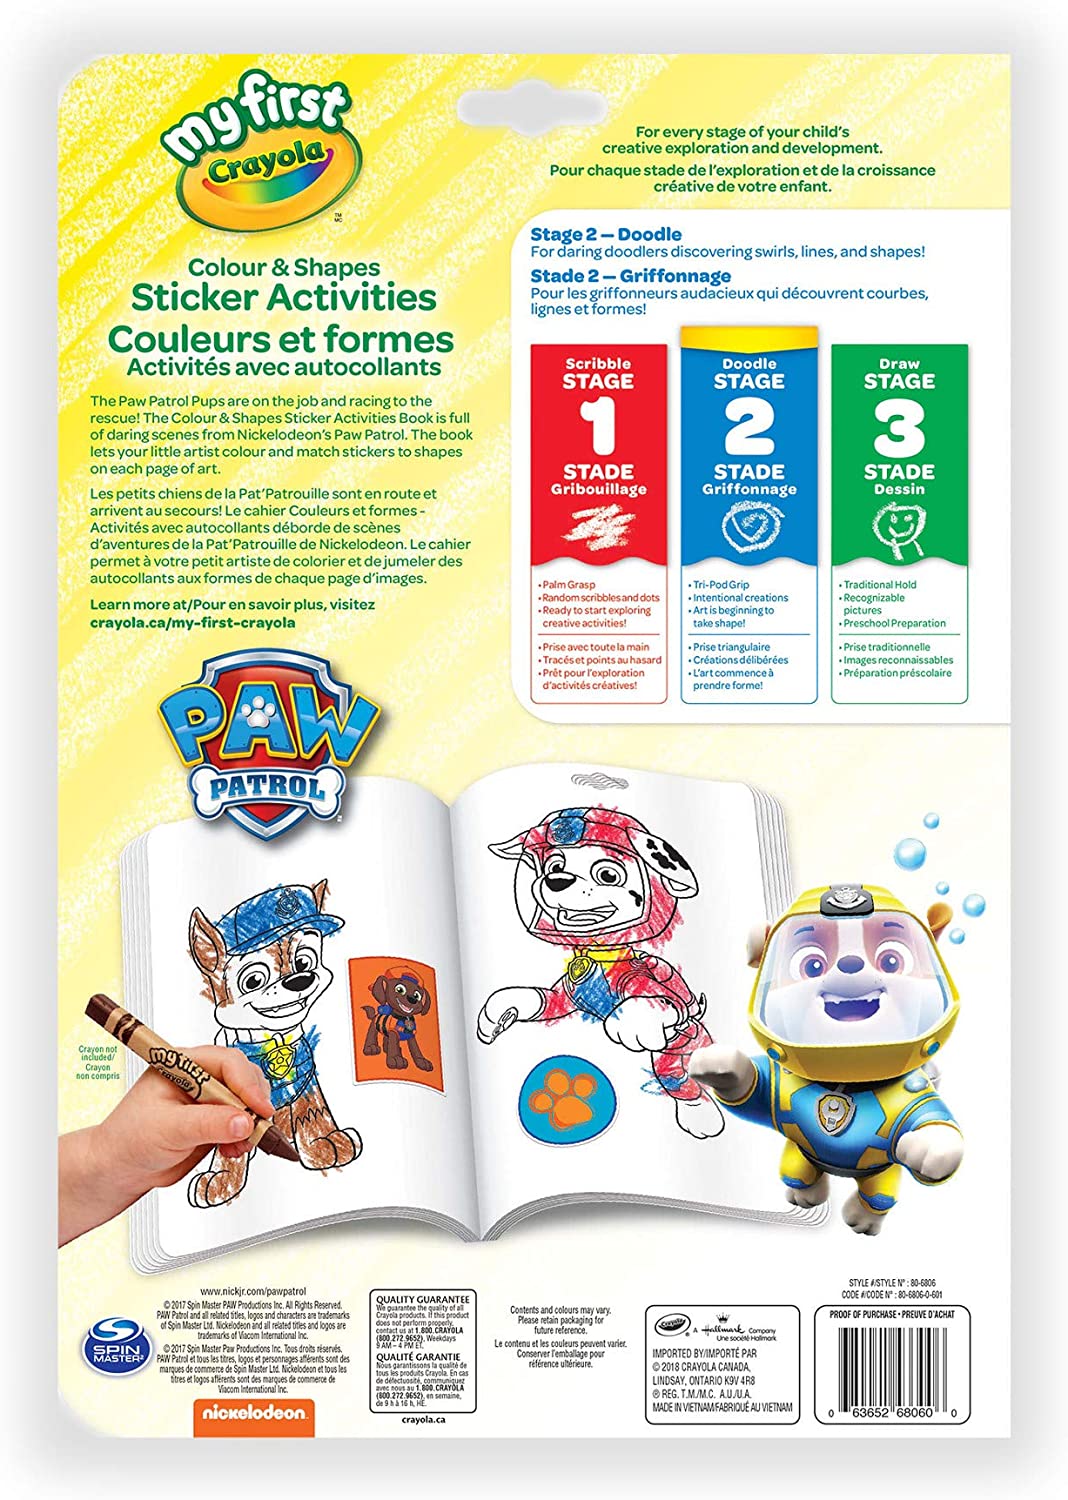 Paw Patrol: Colour & Shapes Sticker Activities | Crayola